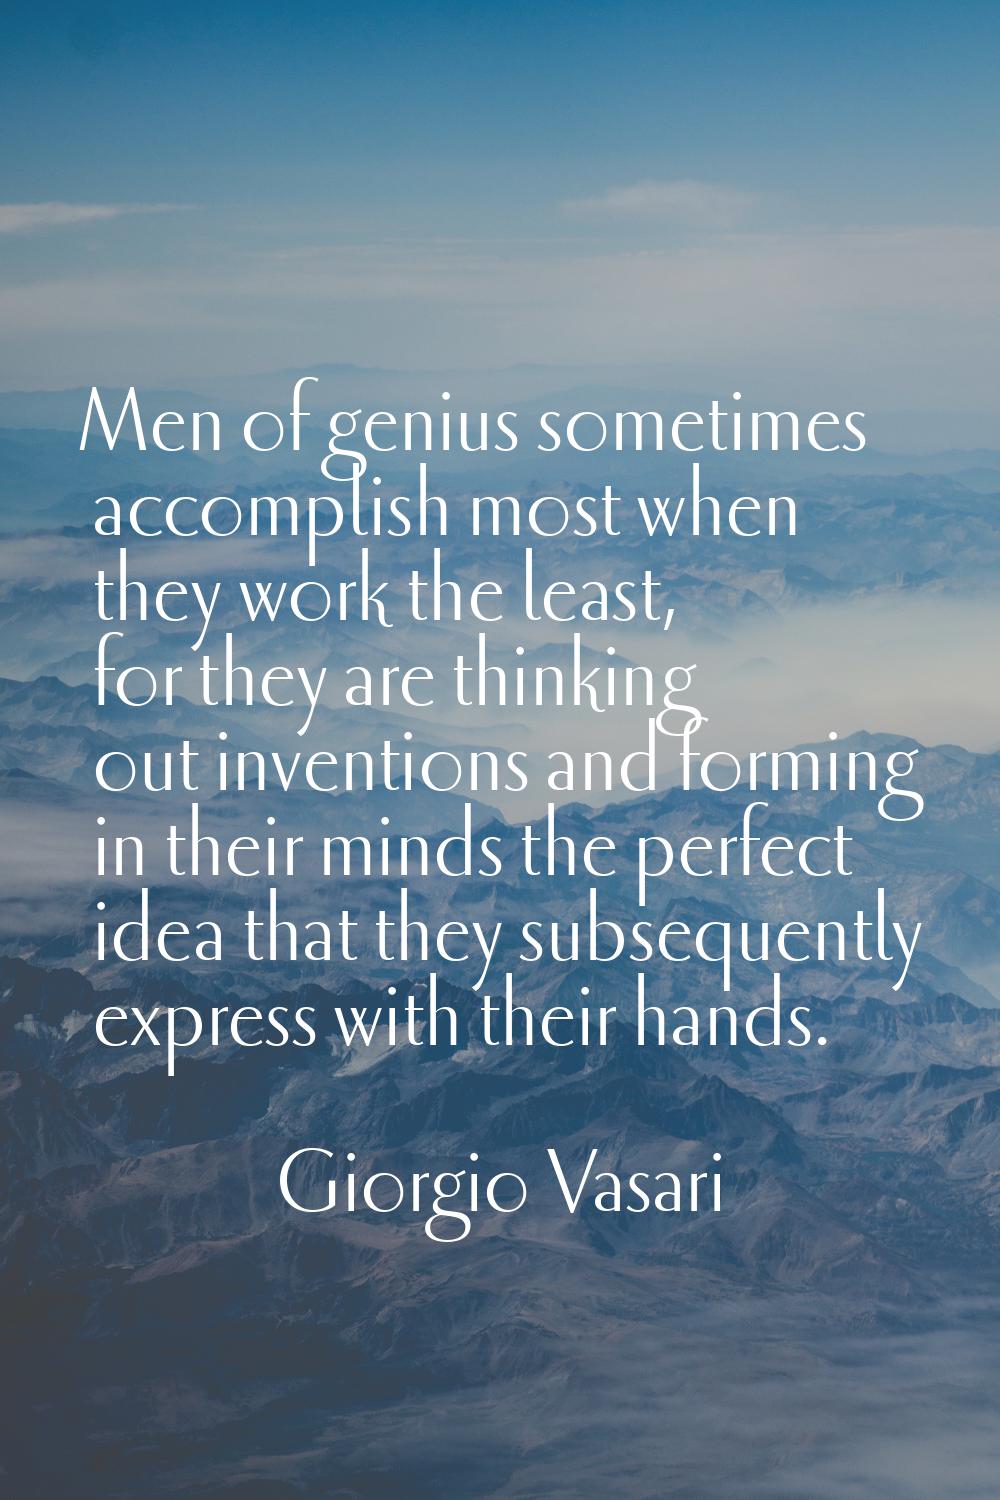 Men of genius sometimes accomplish most when they work the least, for they are thinking out inventi